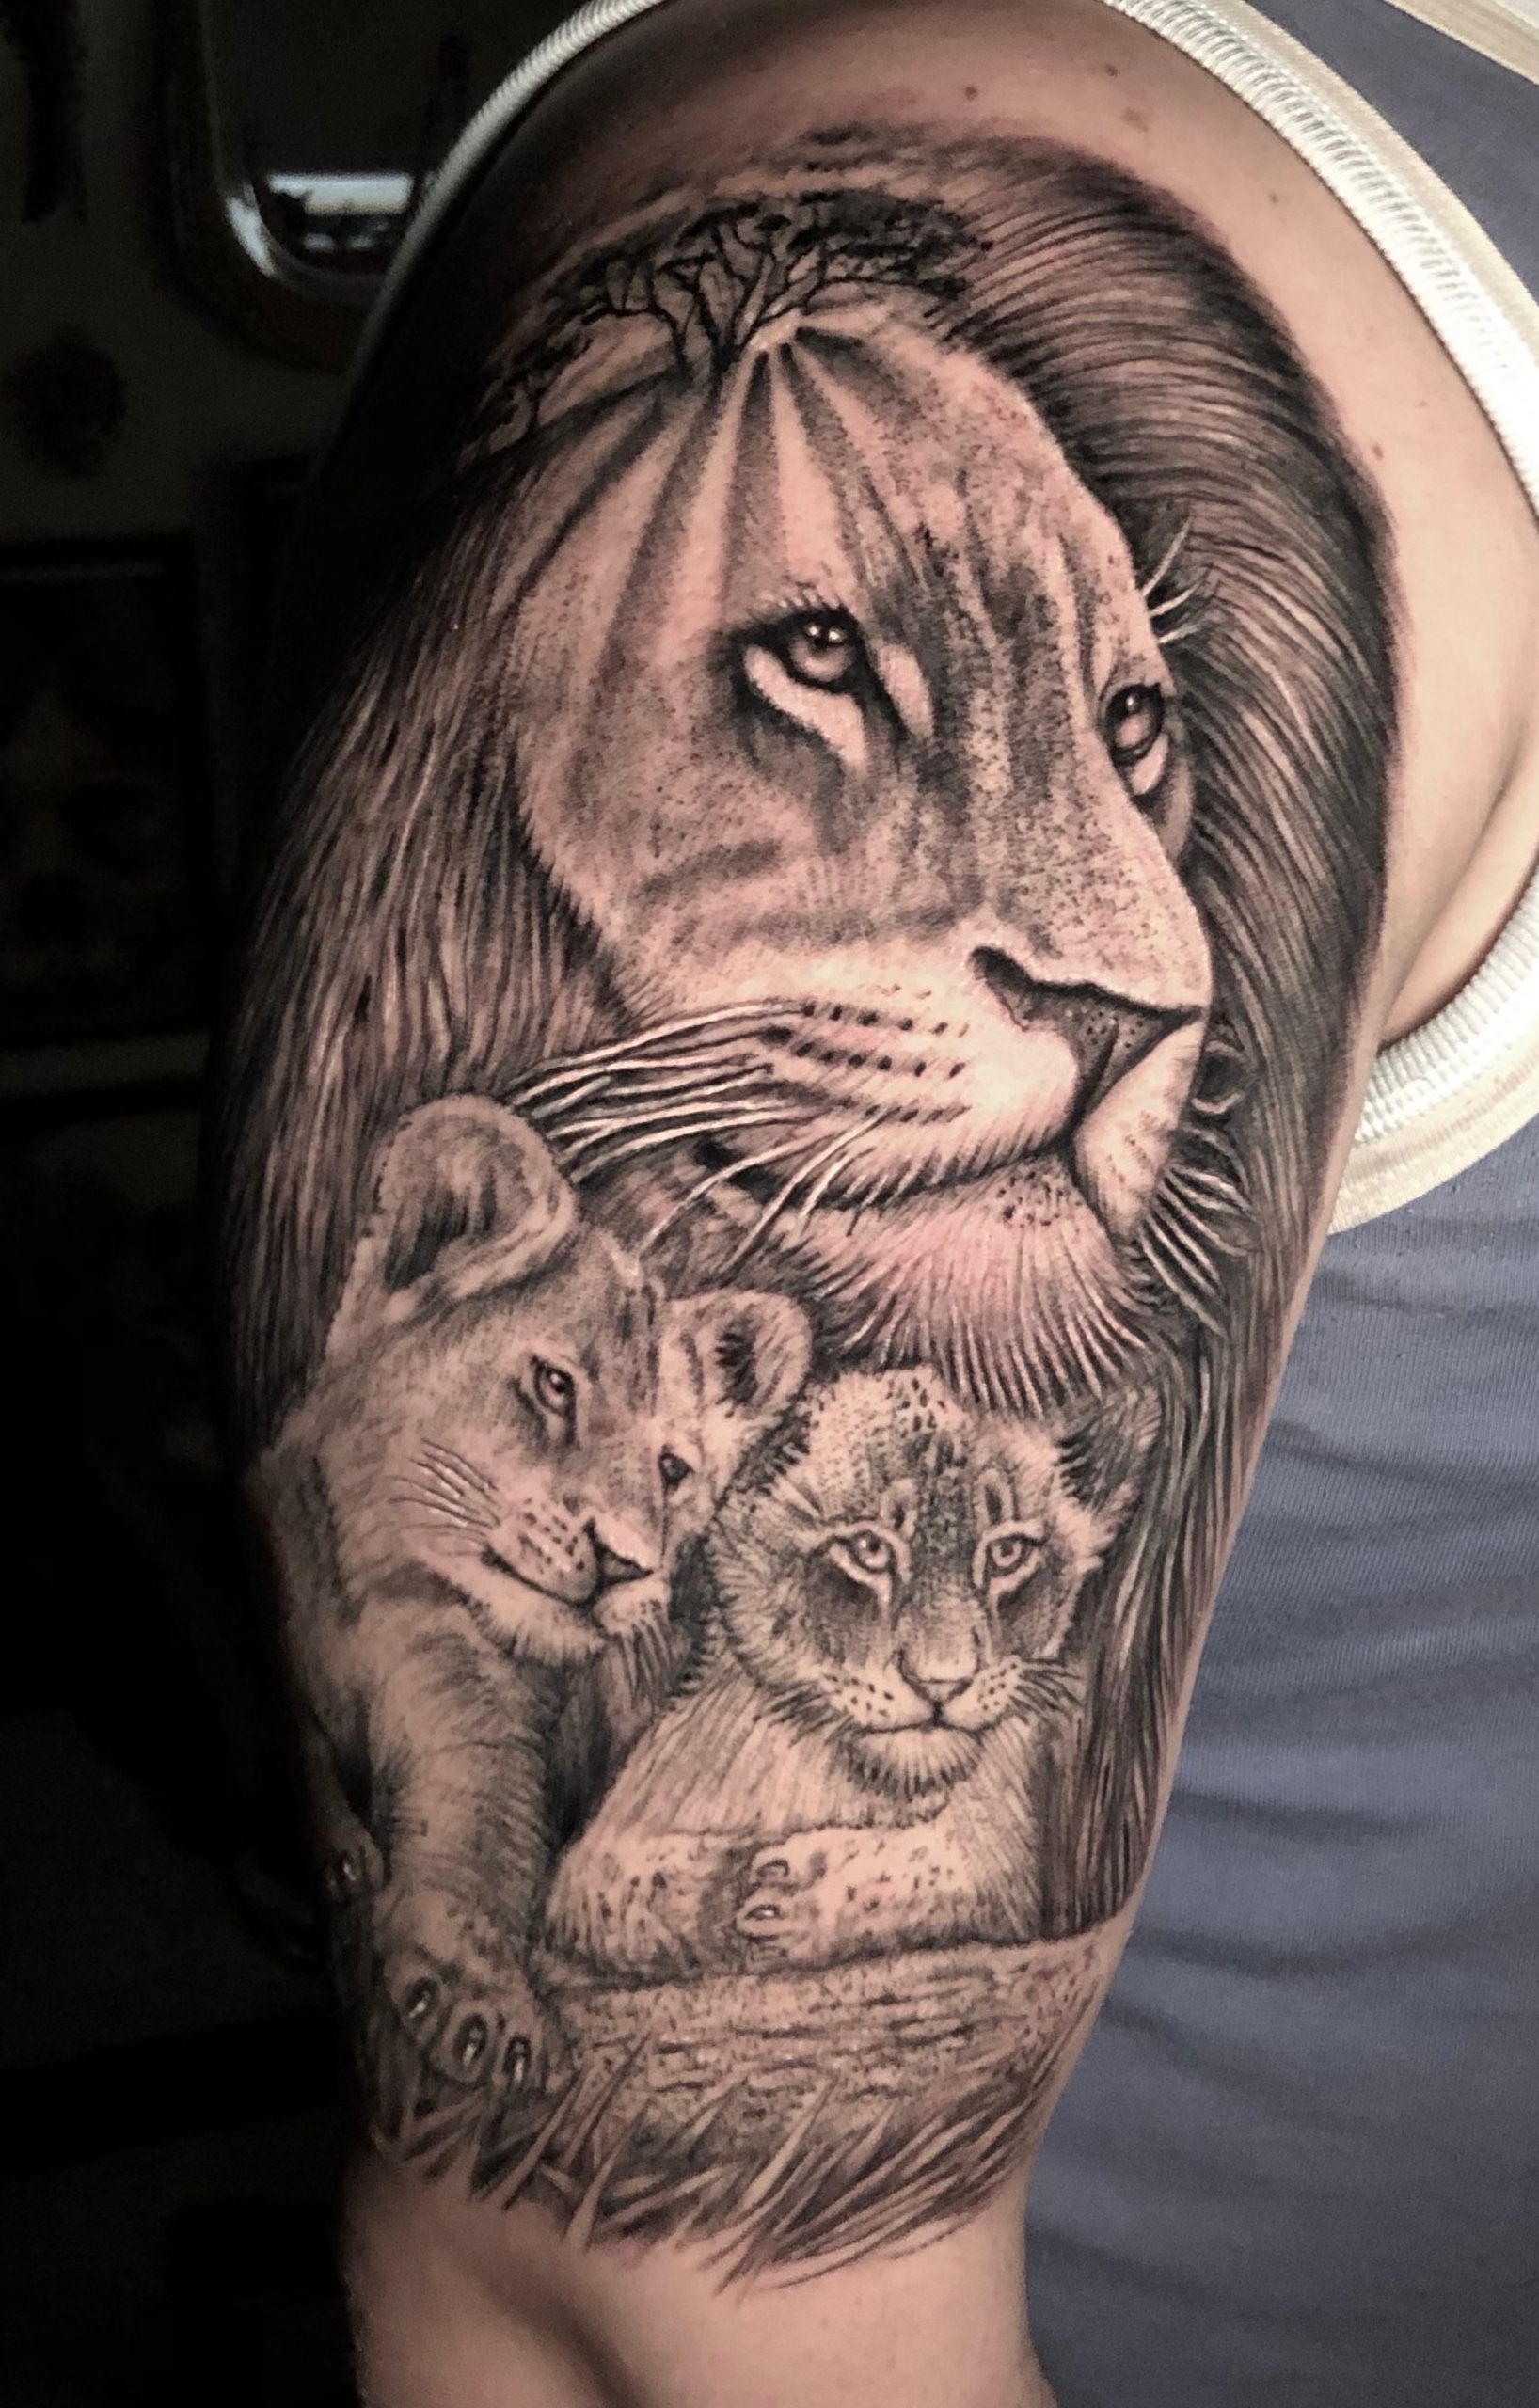 Lions Den Tattoo on Instagram: “For mom and dad - tatz from